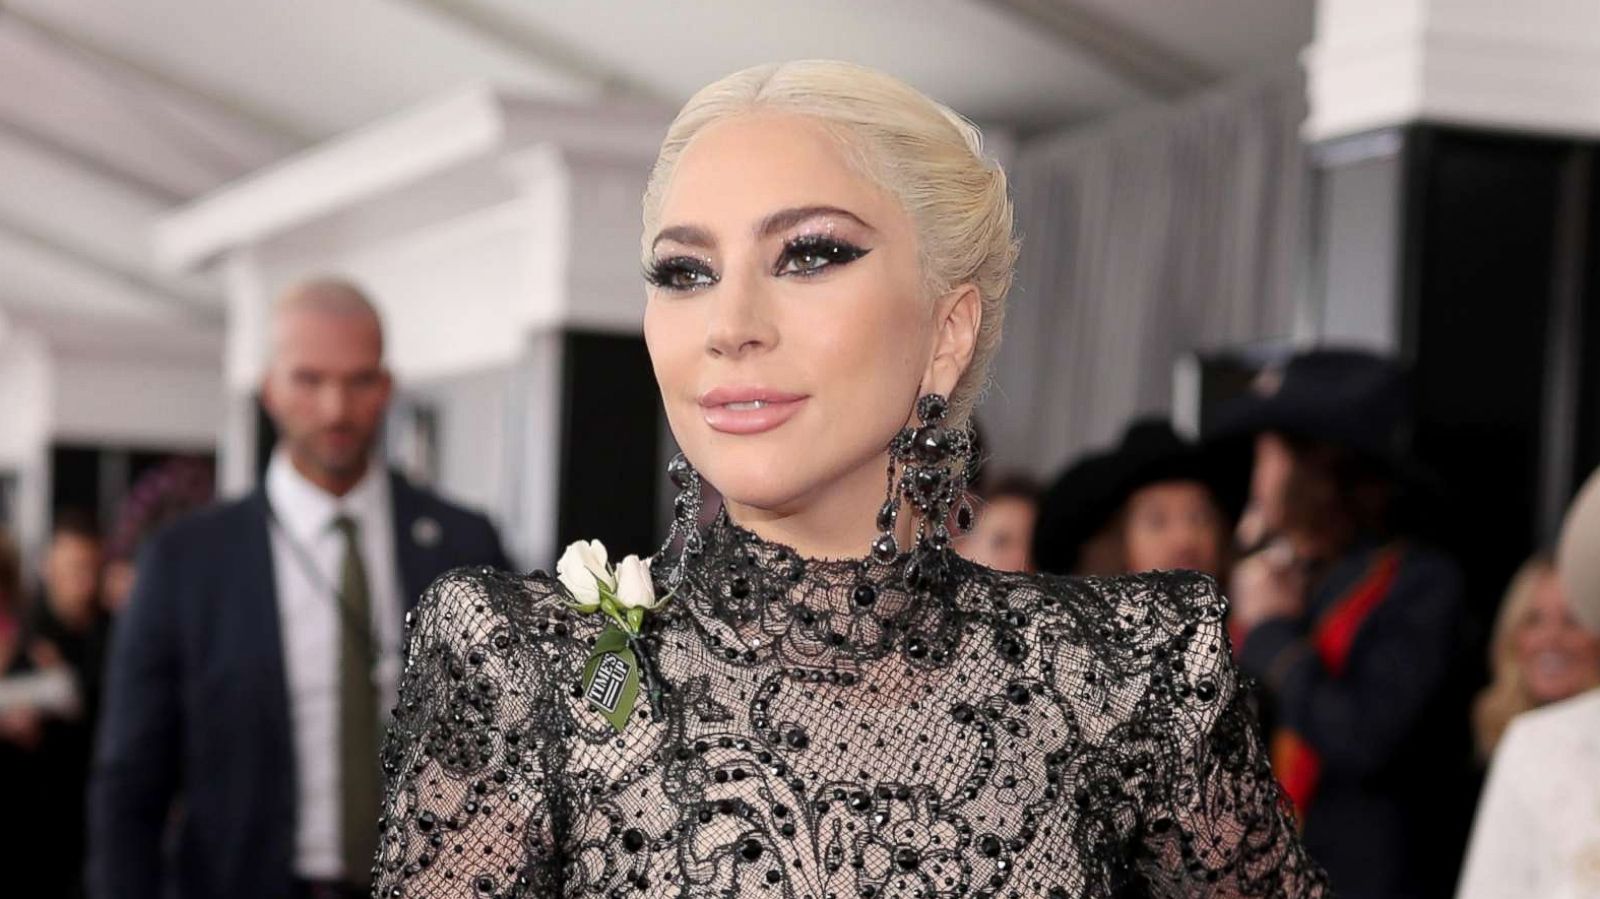 PHOTO: Lady Gaga attends the 60th Annual Grammy Awards at Madison Square Garden, Jan. 28, 2018, in New York City.